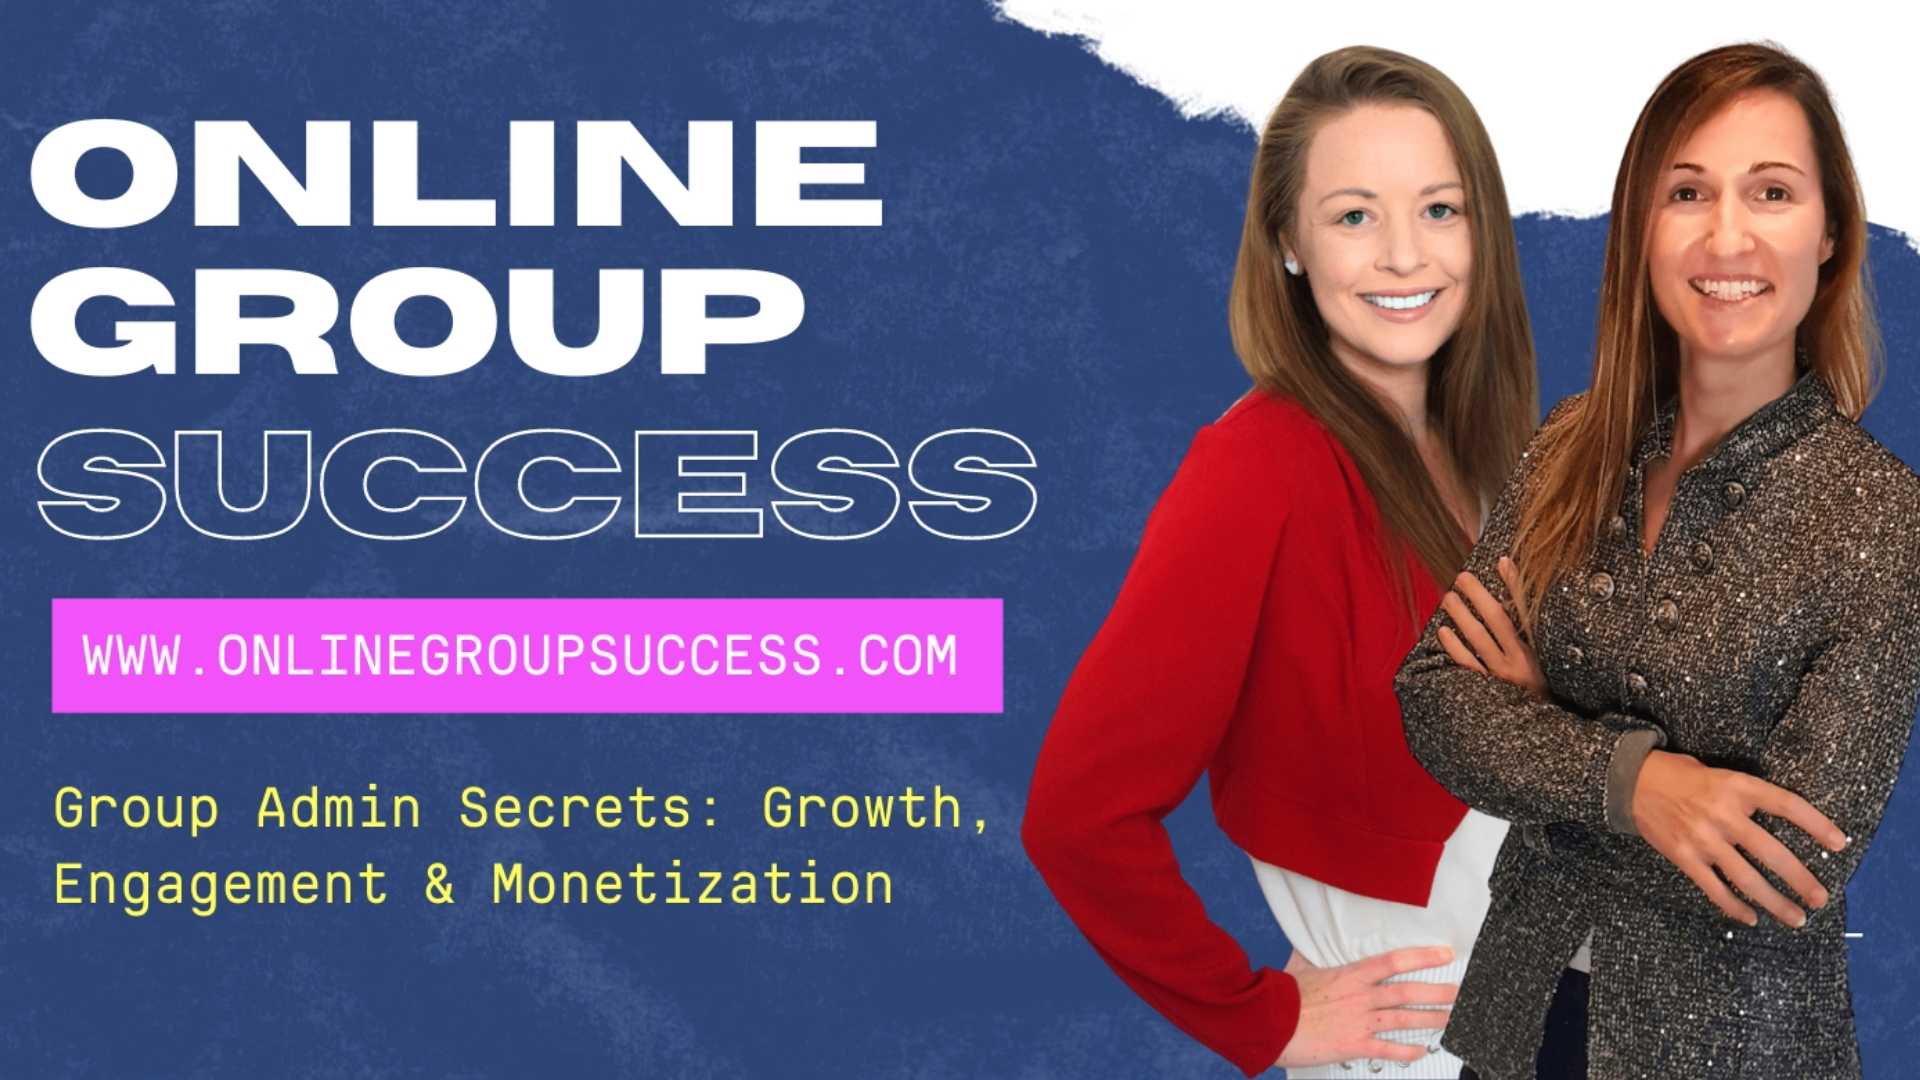 Online Group Success with Mar Pages